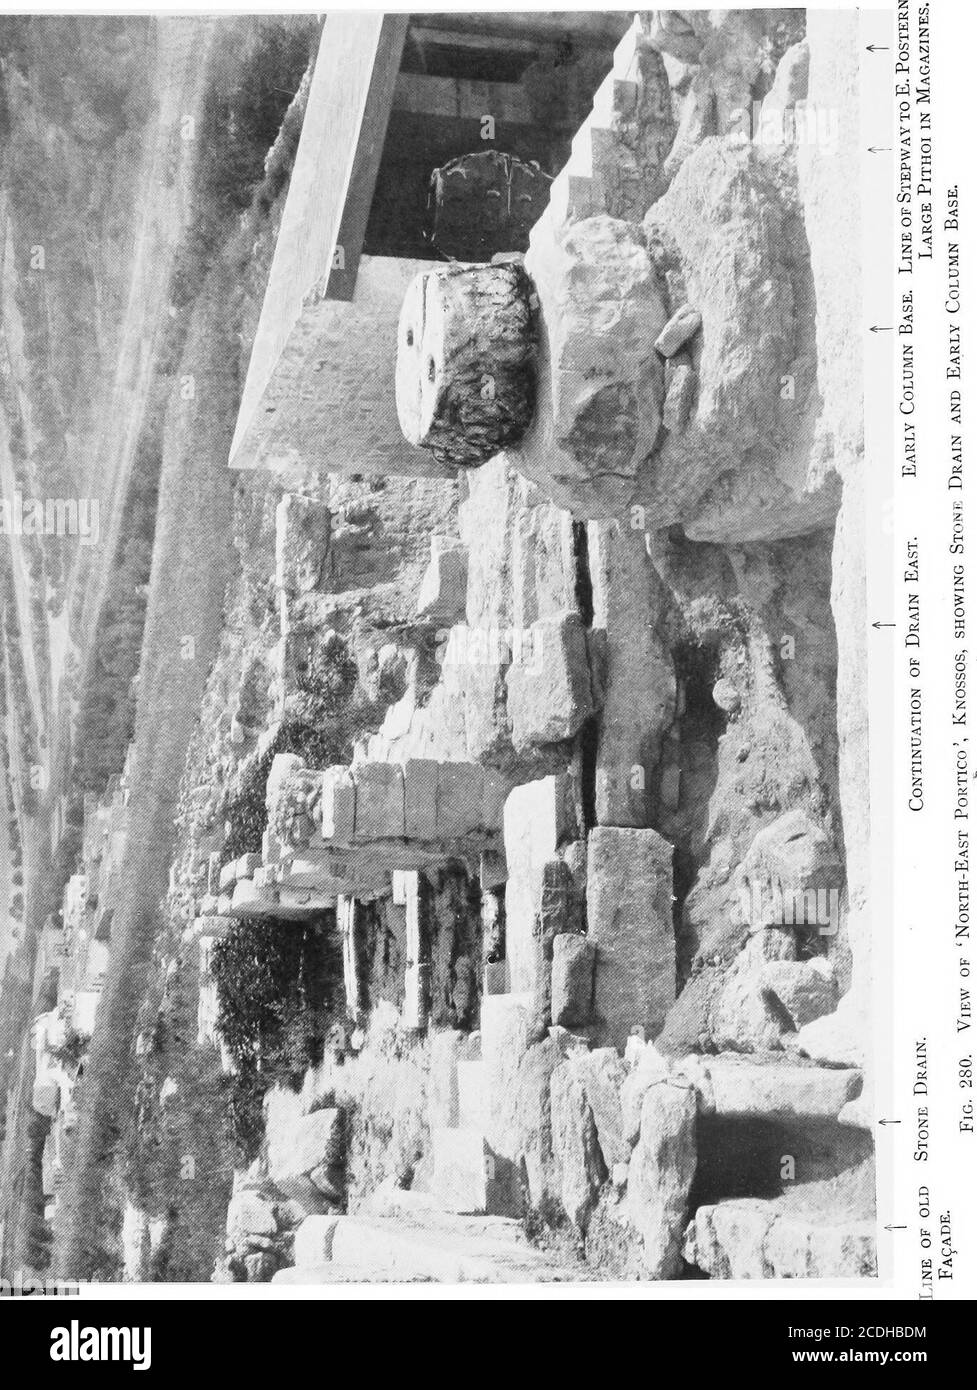 . The palace of Minos : a comparative account of the successive stages of the early Cretan civilization as illustrated by the discoveries at Knossos . ty of these and the corresponding column at a higherMvel on the slopeof the hill will be more fully realized from the view given in^uppl. PI. T1I.The column base that has been preserved is of the same^^reccia as thoseassociated :with the Spiral Fresco * and was originally of ^Ritical shape. Ithad,:bowever, been readapted for a wooden column of sffliUer dimensionsby a ledge cut round itsupper circumference. In all pro^miilitv these baseshad once Stock Photo